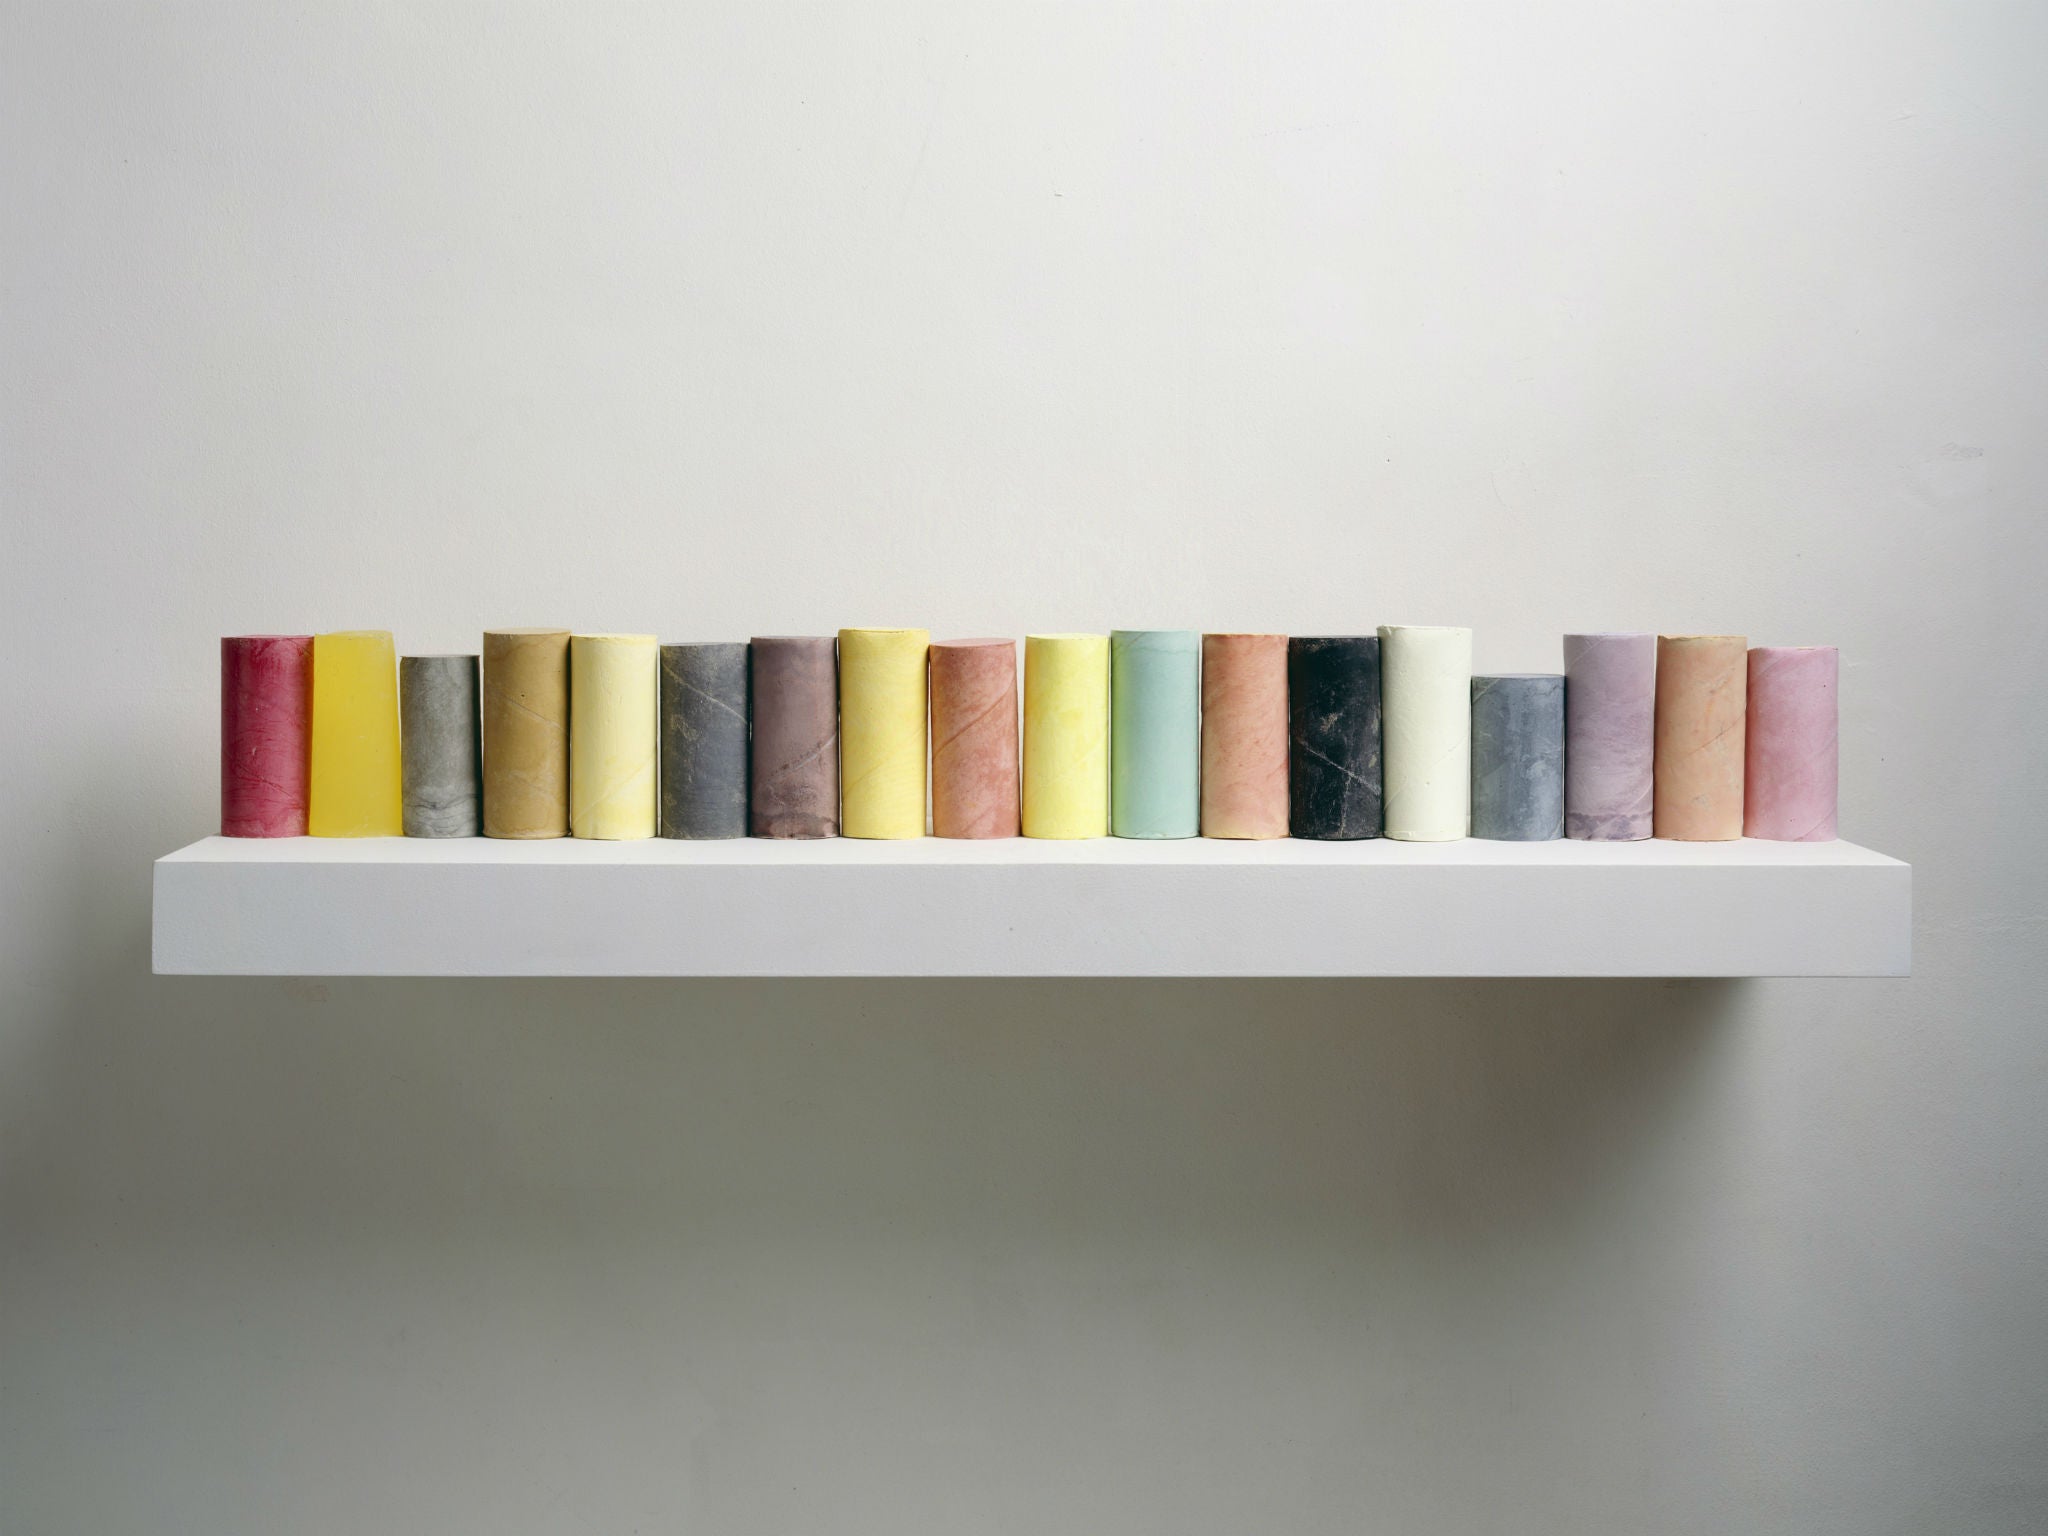 ‘Line Up’, 2007-8. Plaster, pigment, resin, wood and metal (18 units, one shelf) (© Rachel Whiteread Photo: courtesy the artist and Mike Bruce)